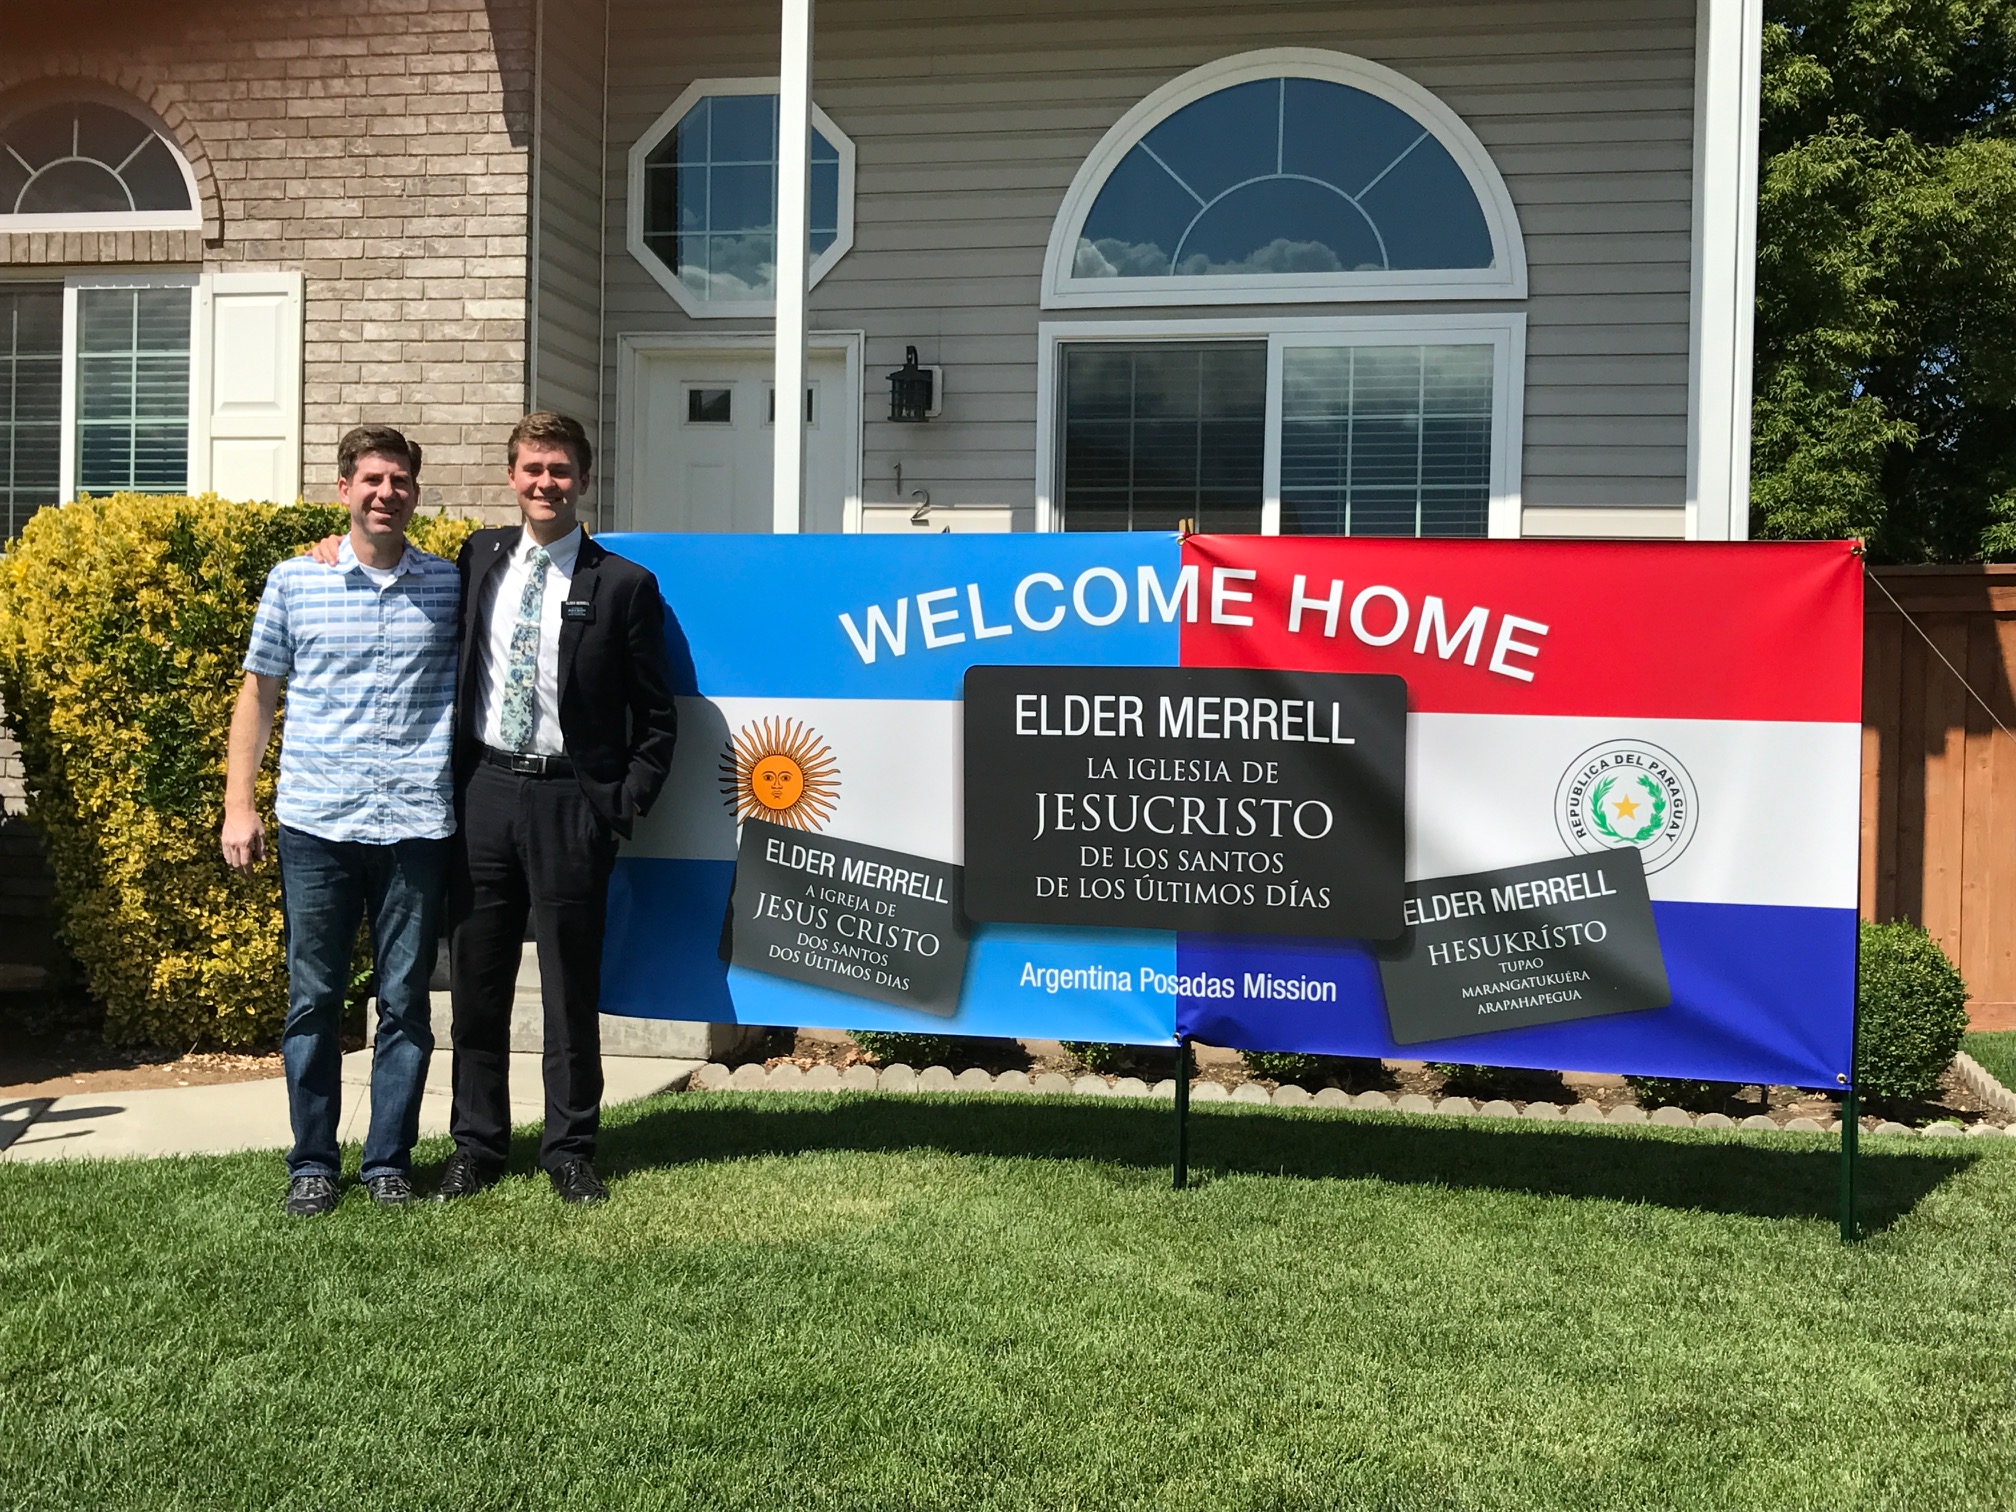 Missionary and “Welcome Home” Banners